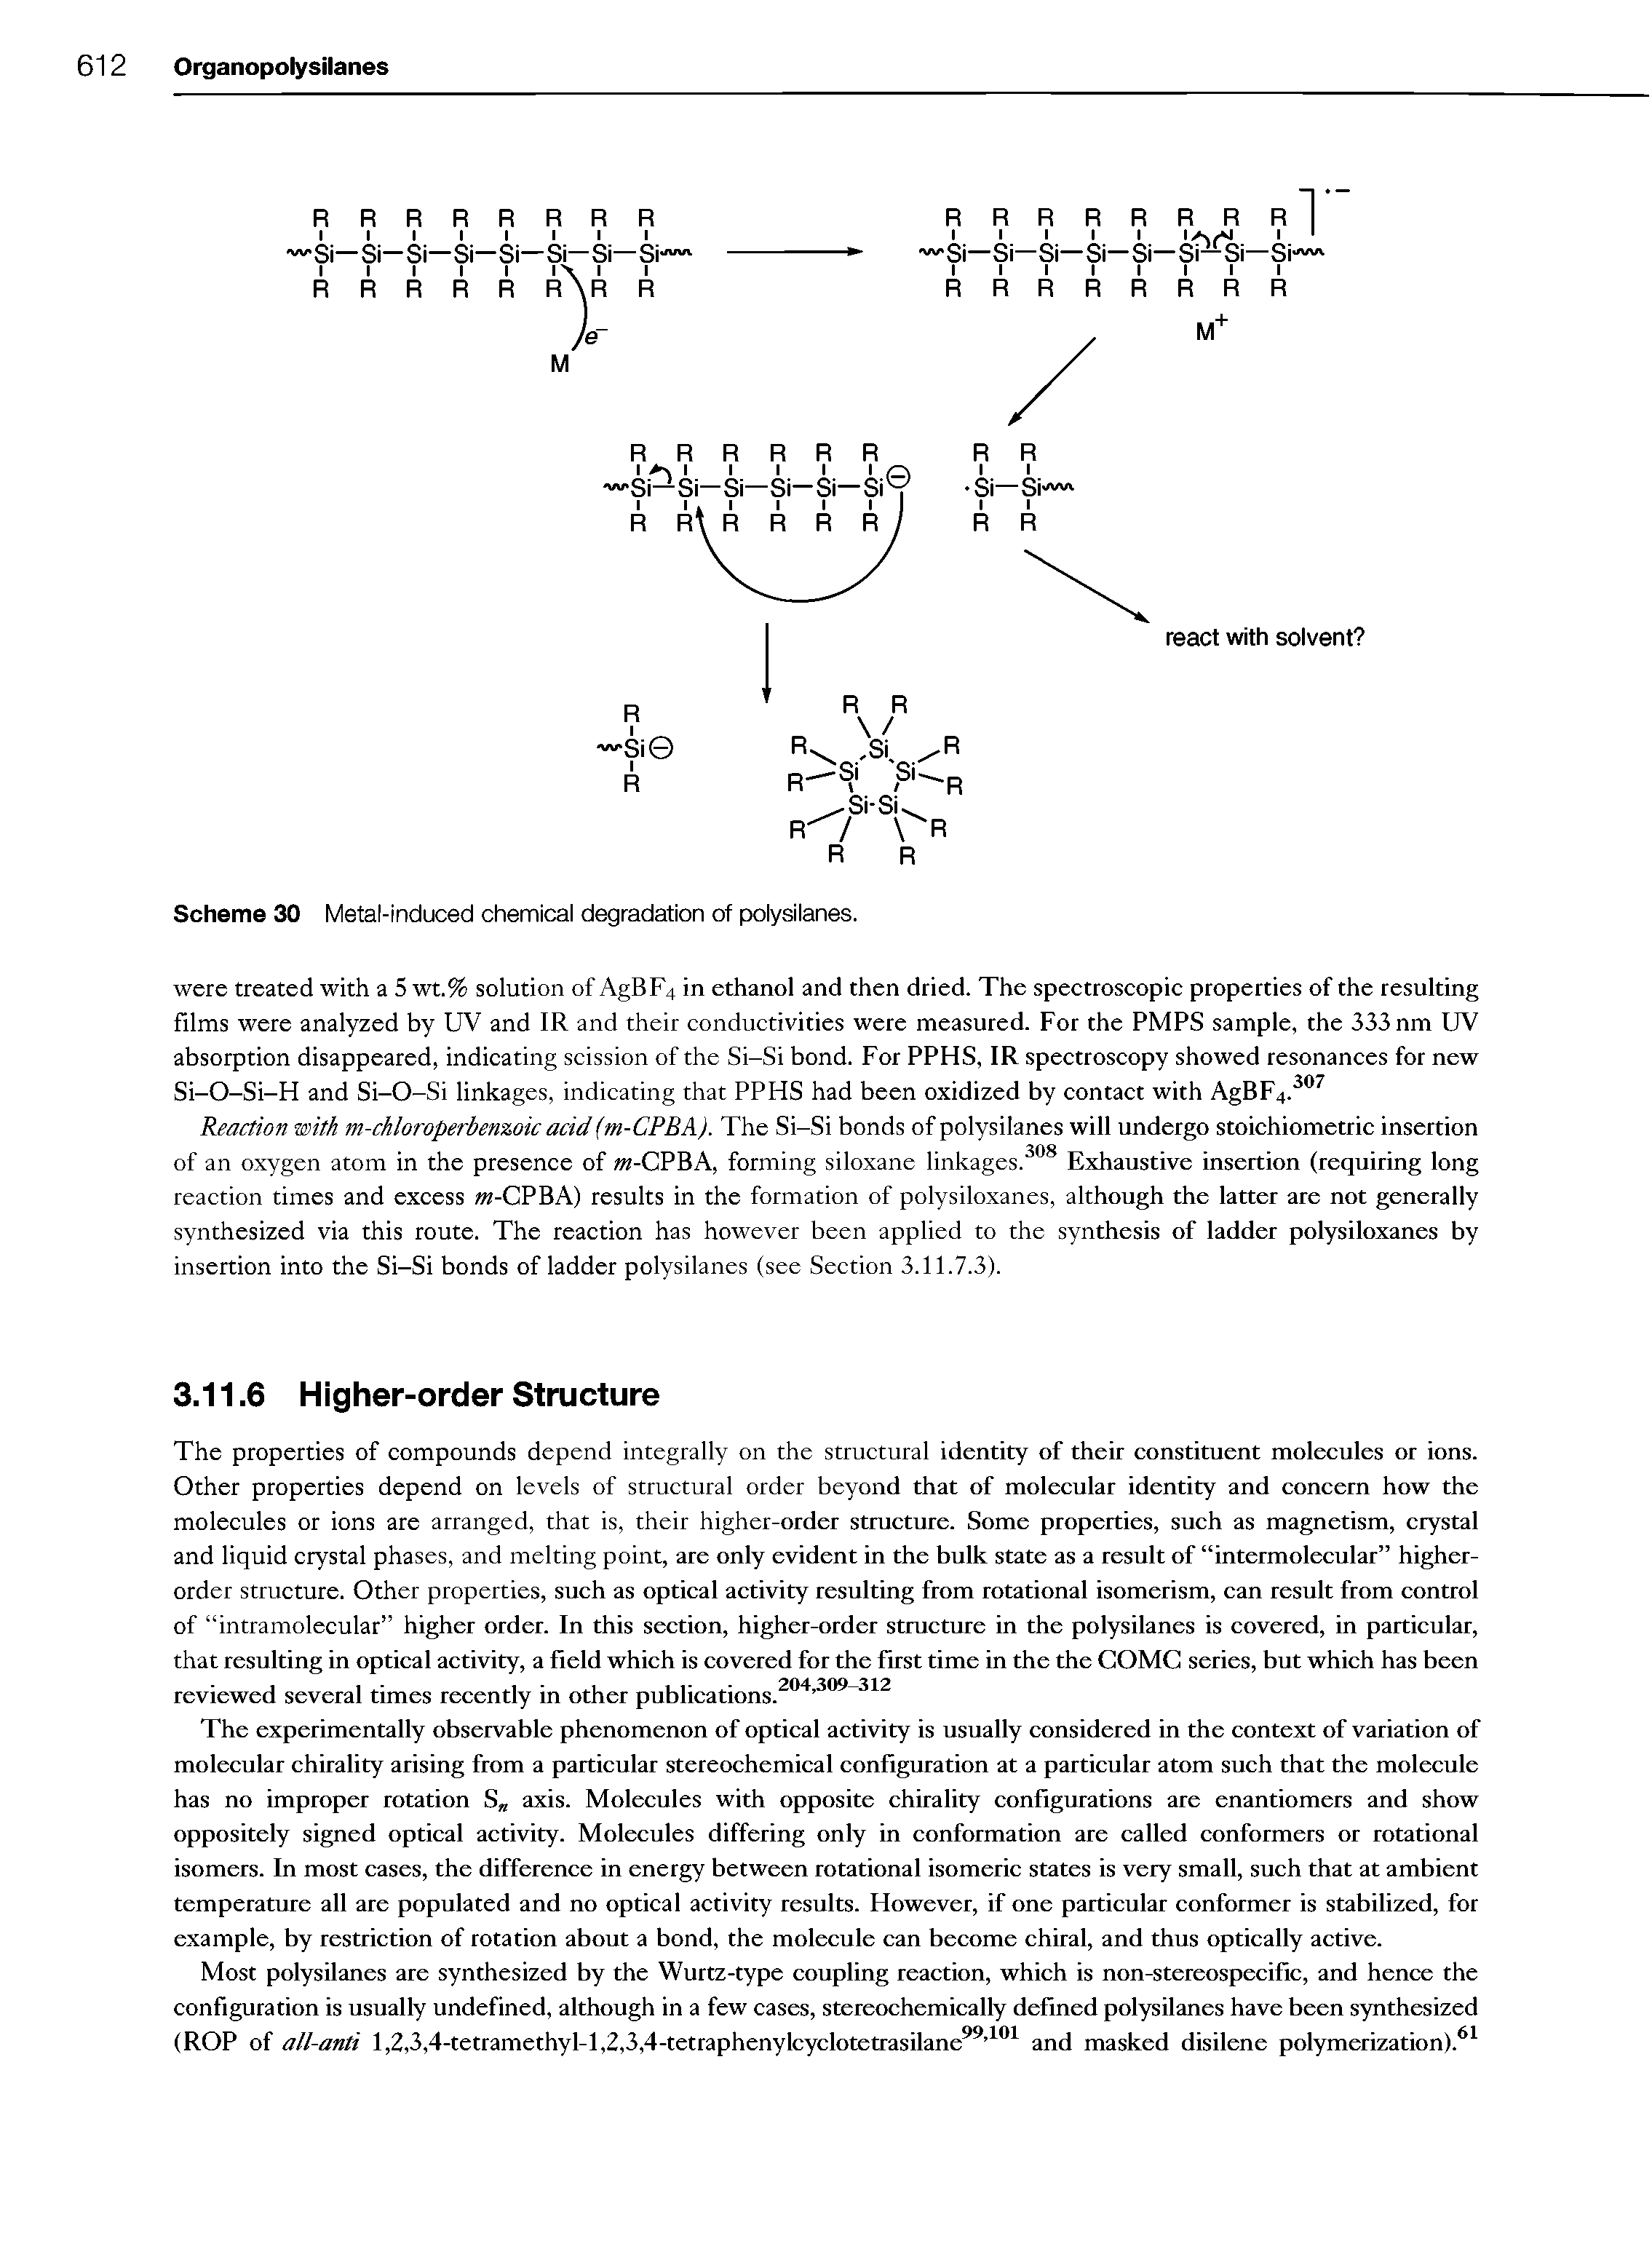 Scheme 30 Metal-induced chemical degradation of polysilanes.